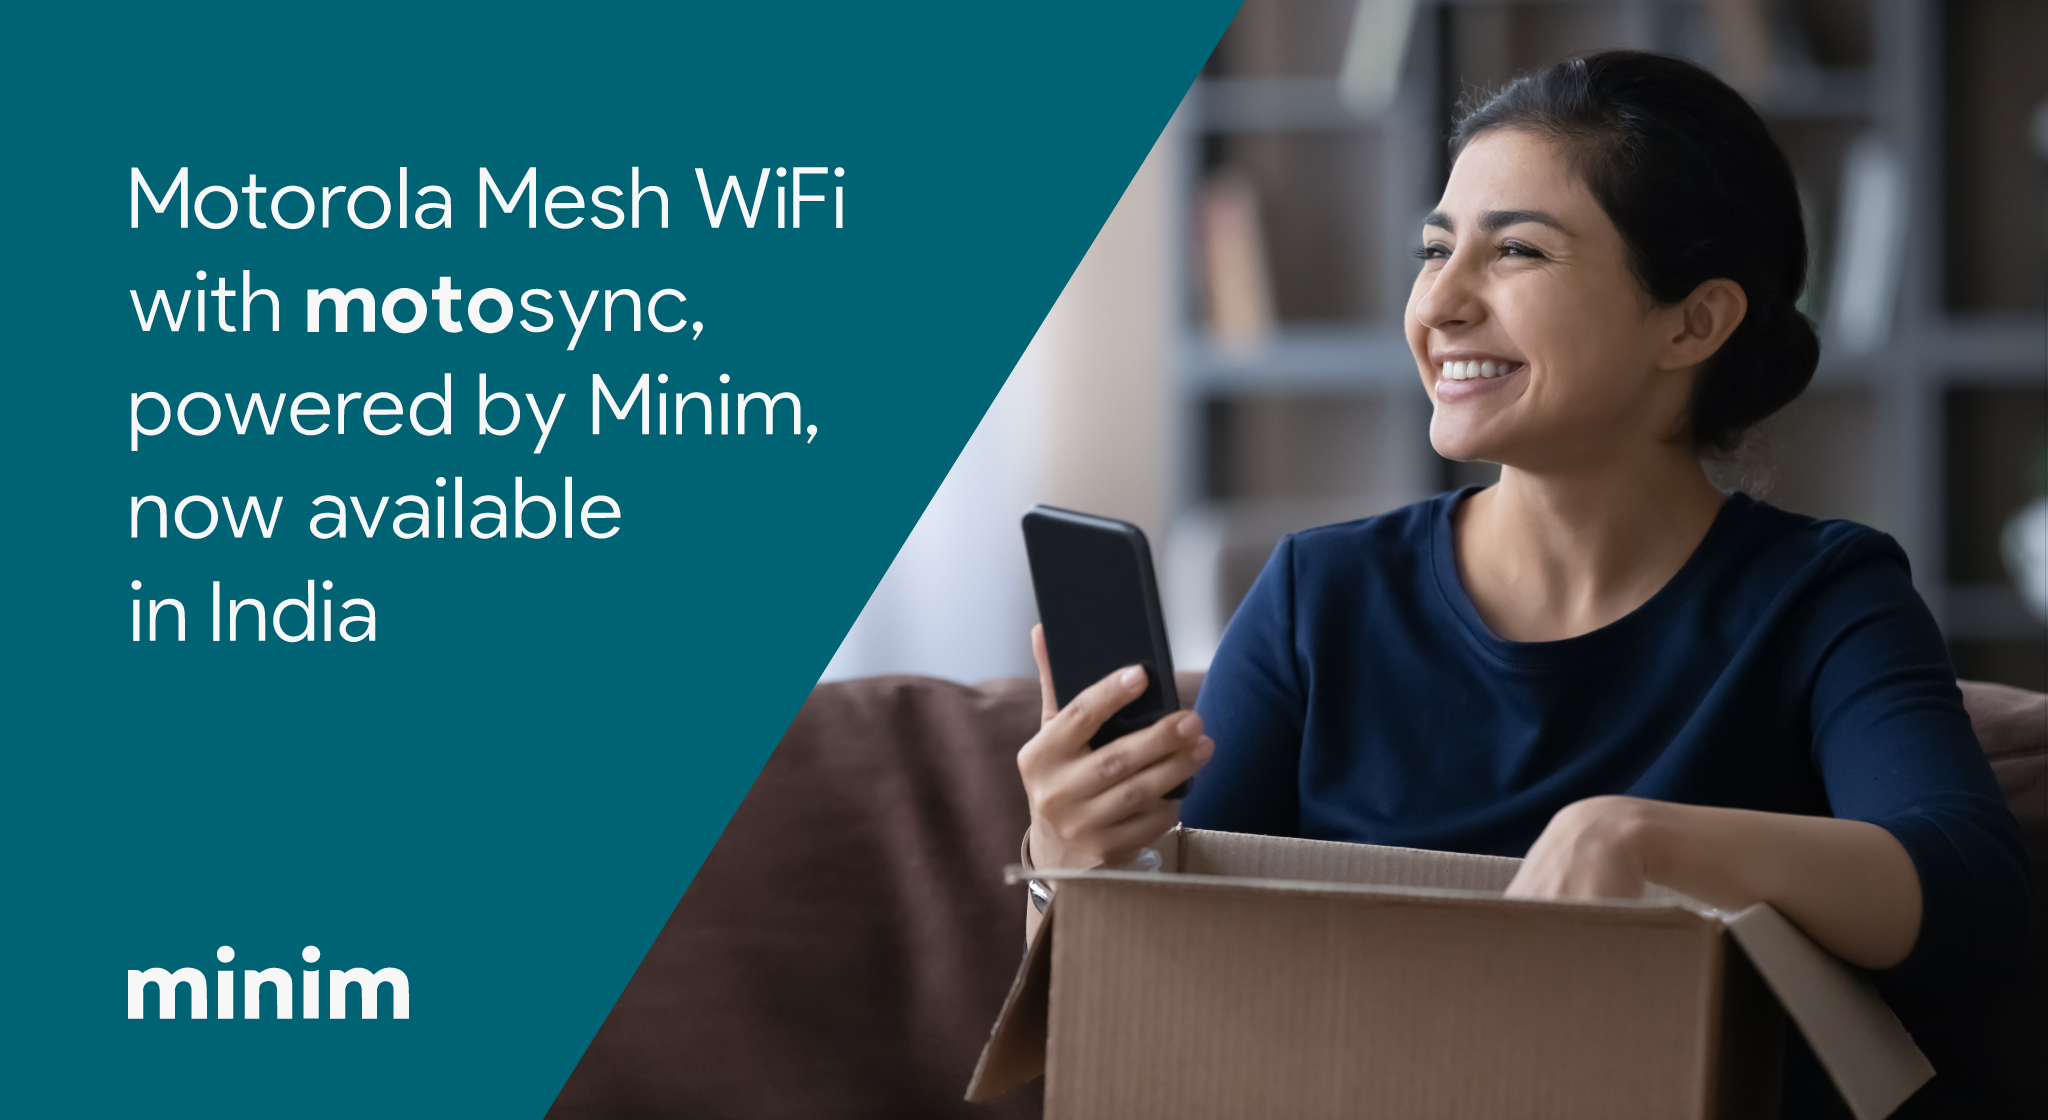 <img src=“mesh-wifi-in-india-woman-smiling.png” alt=“mesh wifi in india woman smiling motosync">